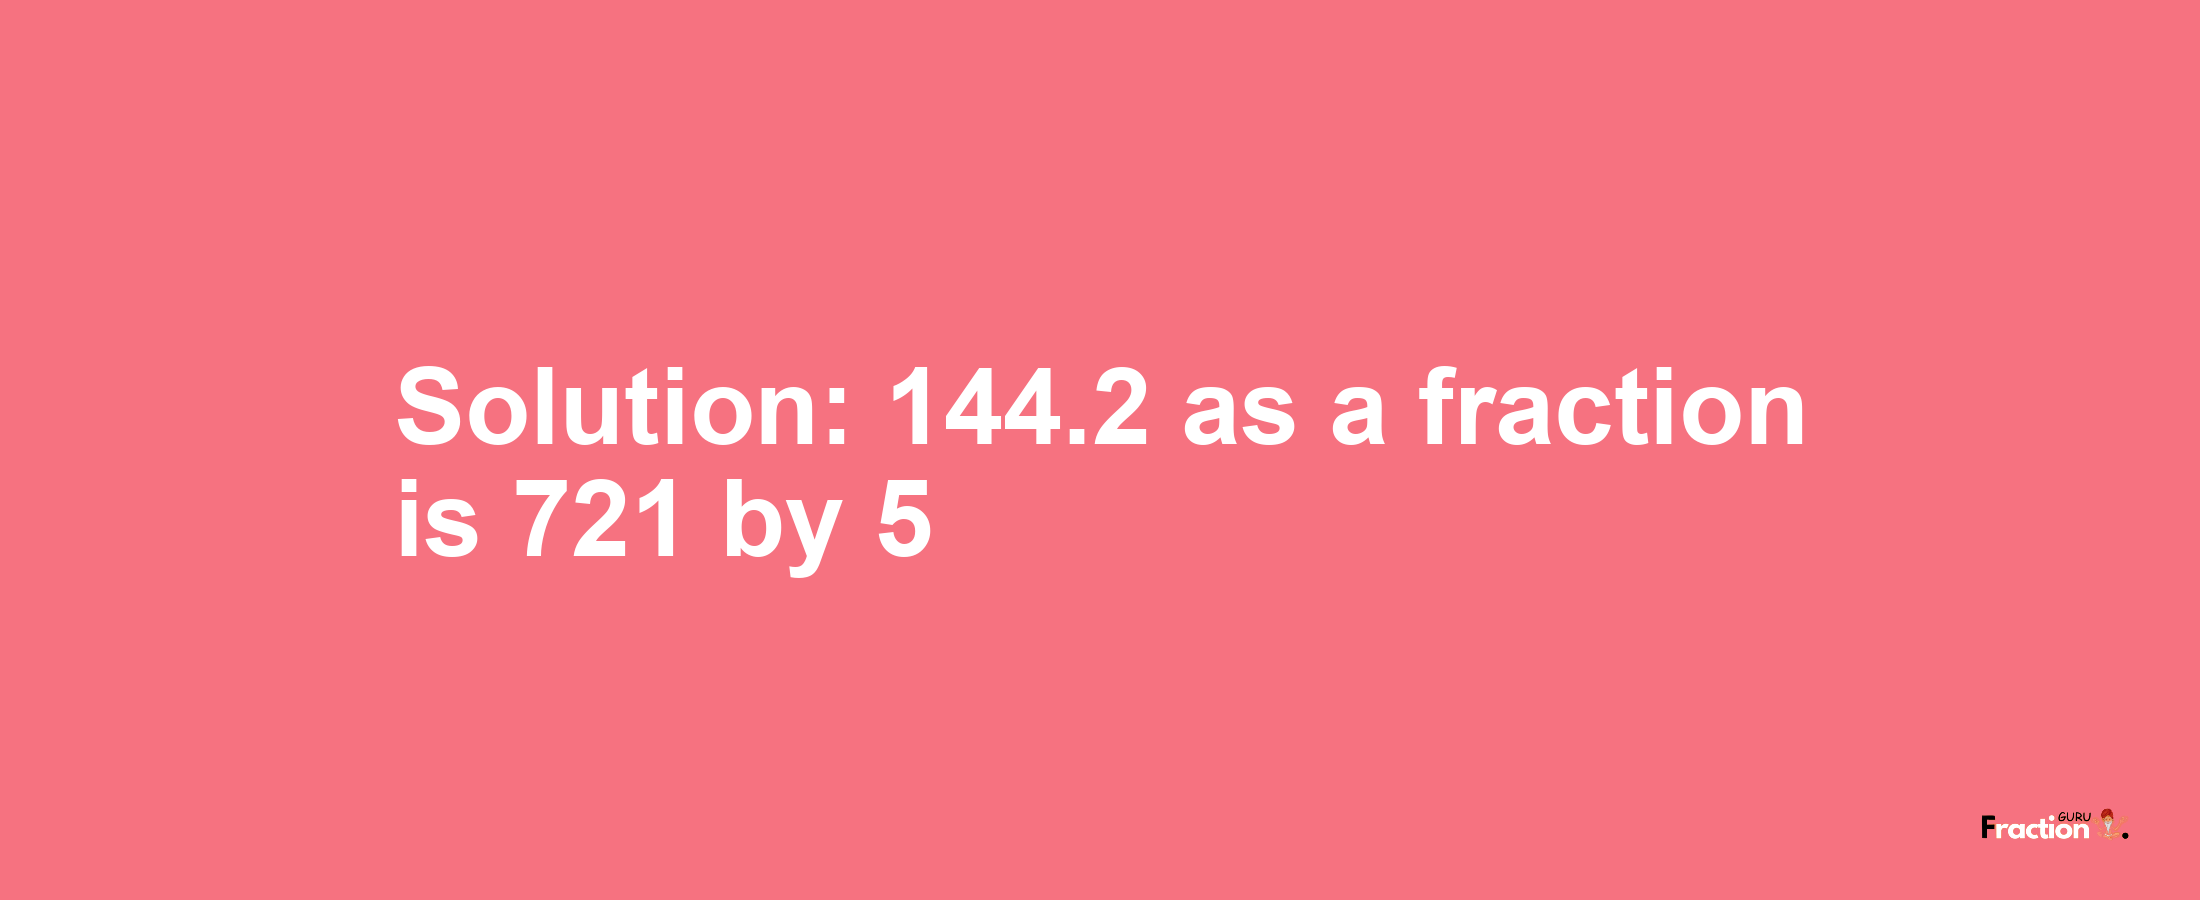 Solution:144.2 as a fraction is 721/5